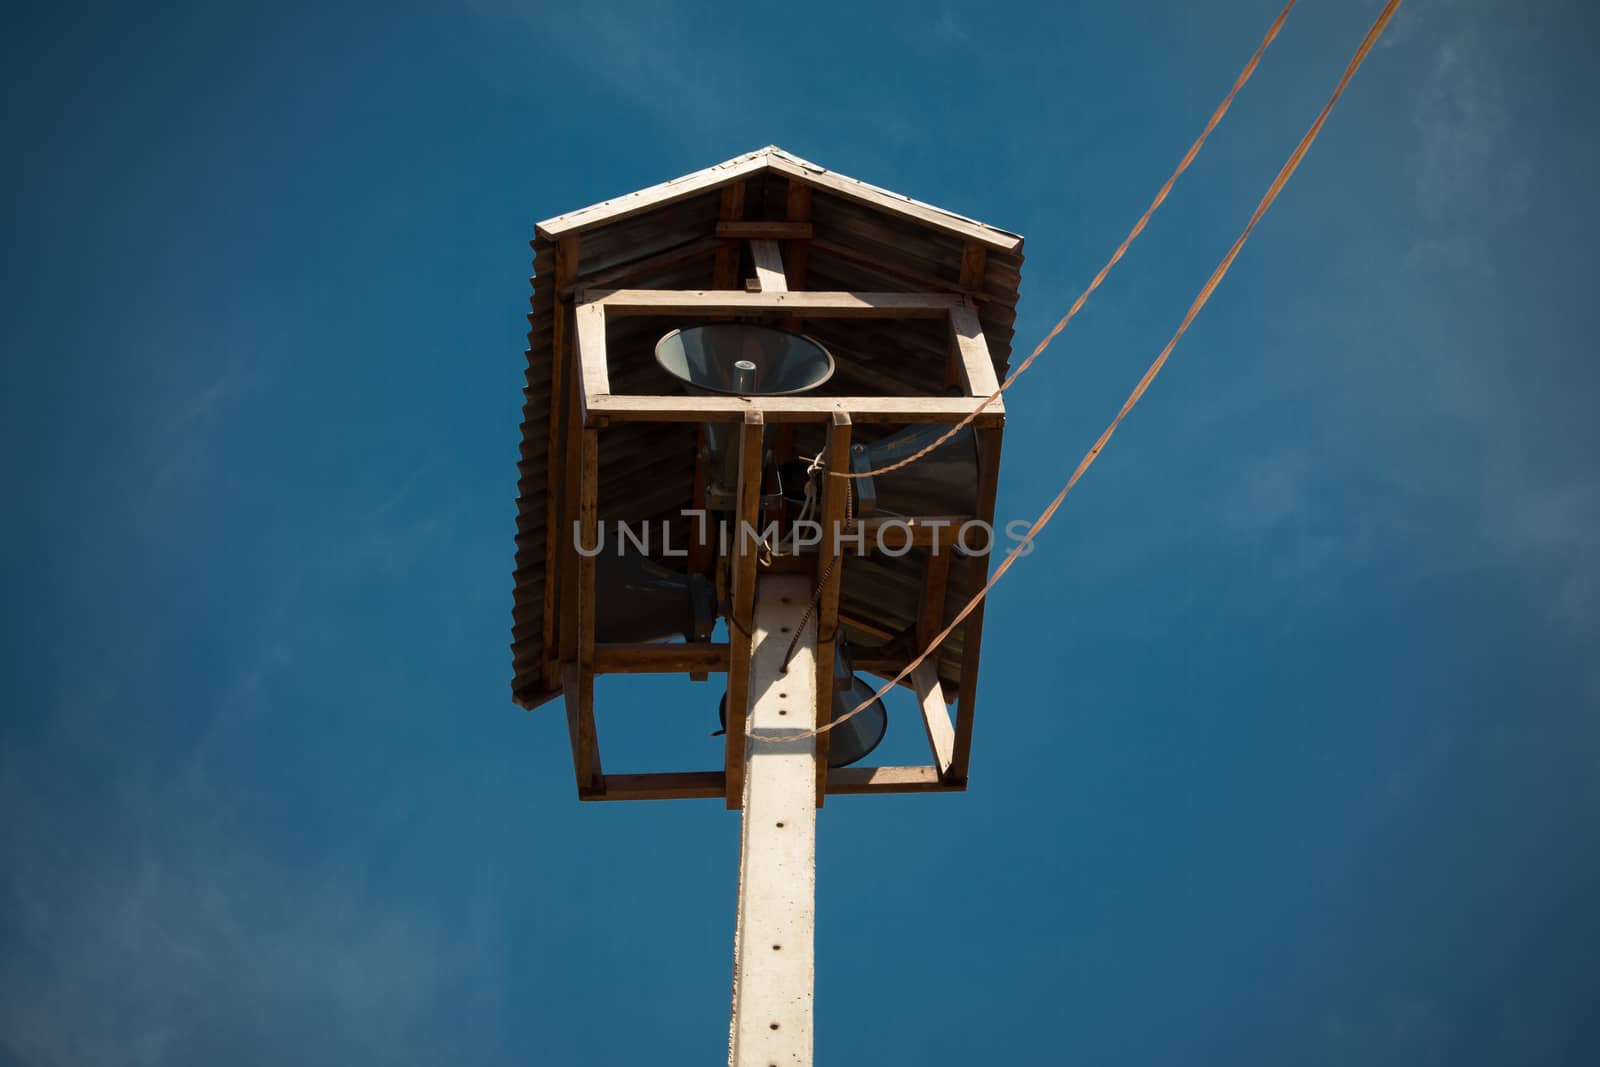 Old public loudspeakers broadcast on high tower with long distance tower